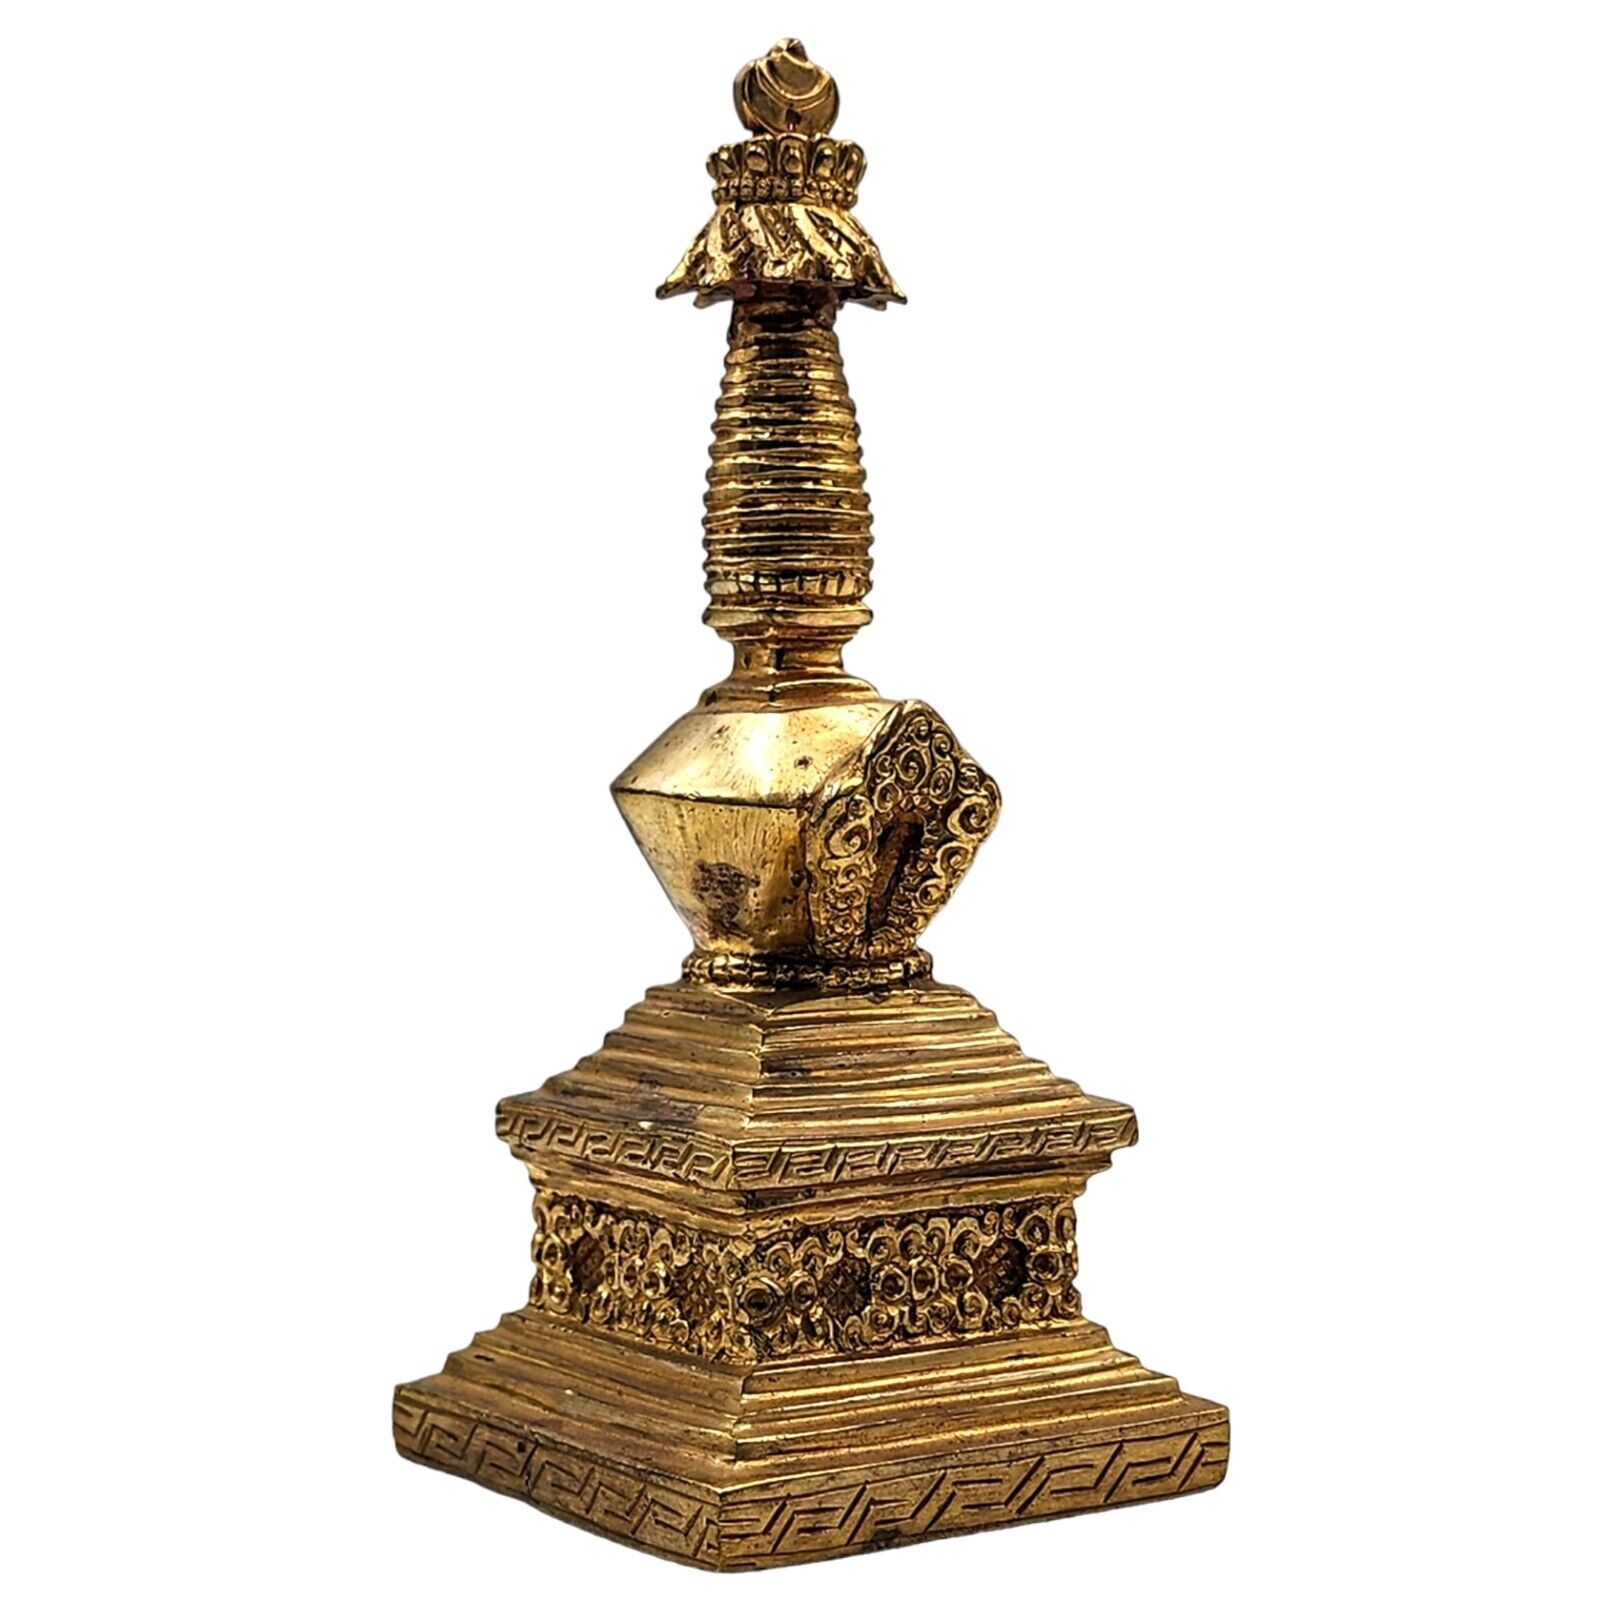 Tibetan Antiqued Décor Buddhist Cooper Gold Lotus Stupa Statue Nepal Collectible